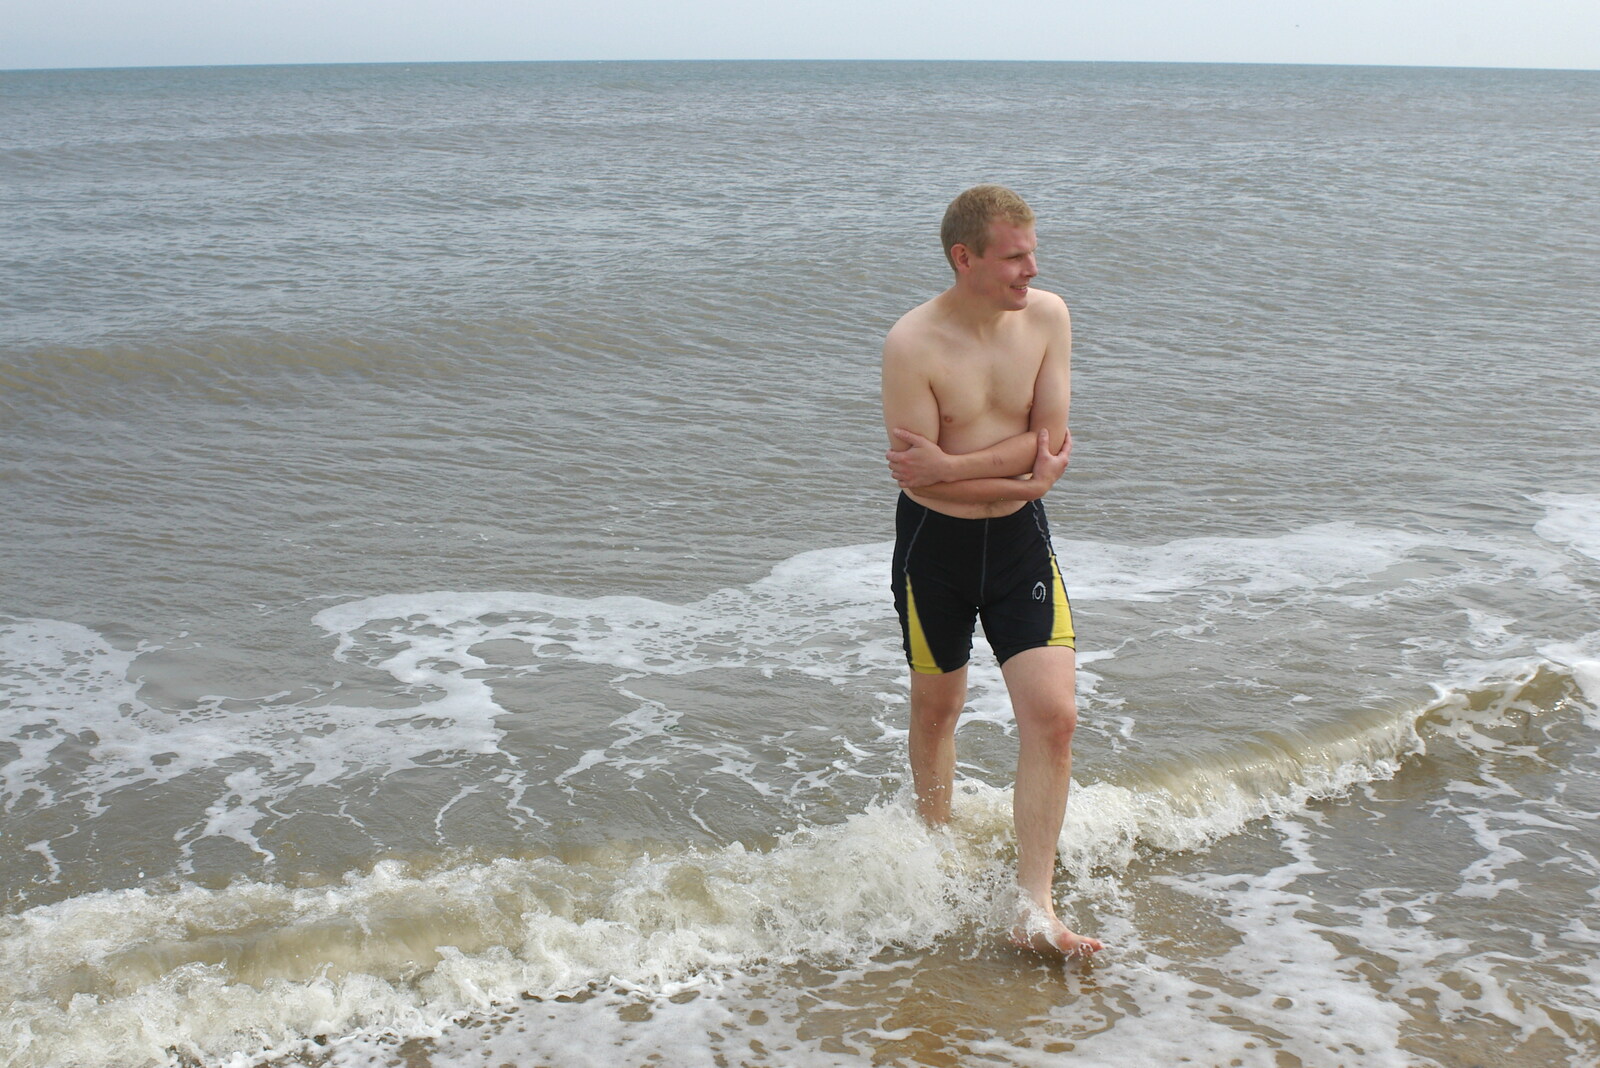 Bill finds the sea a bit cold from The BSCC Charity Bike Ride, Walberswick, Suffolk - 9th July 2005